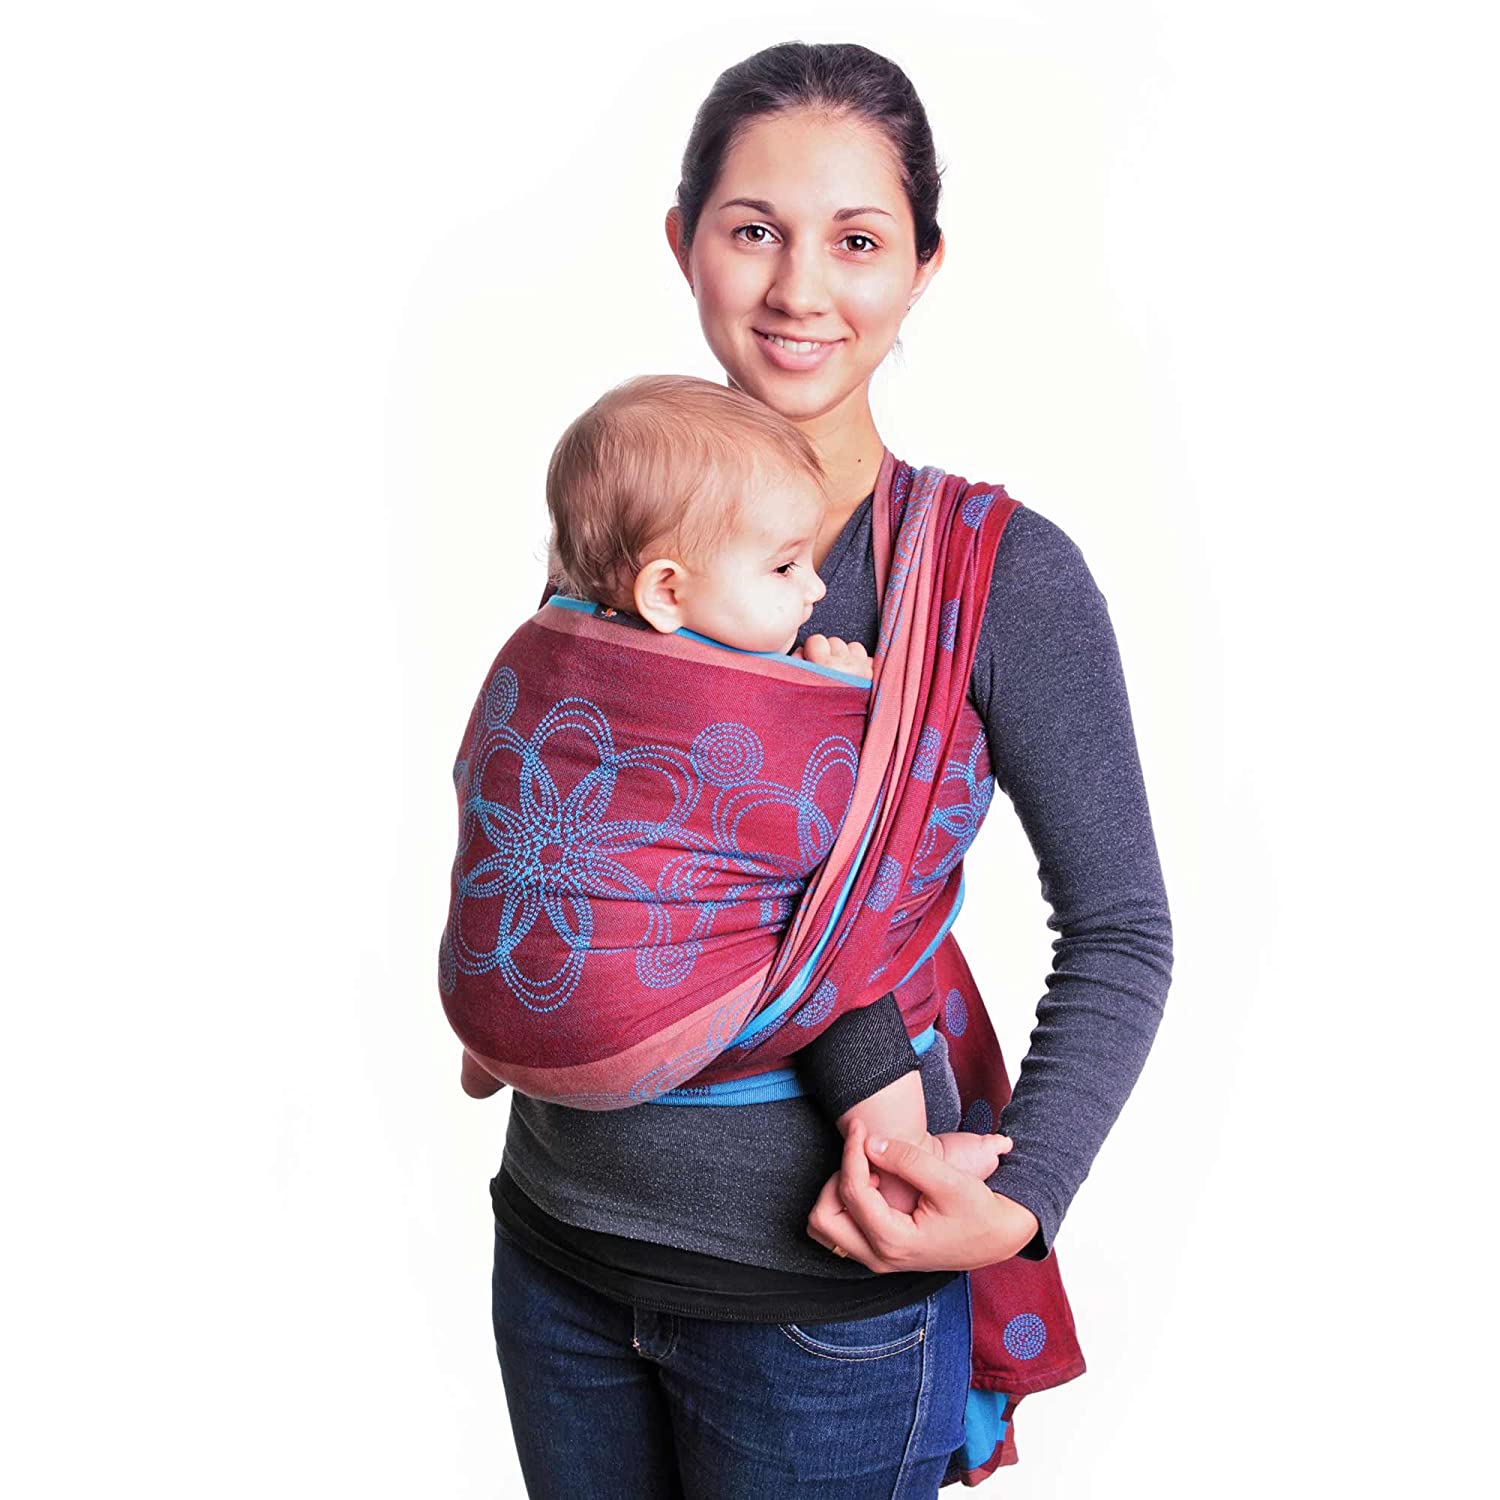 Hoppediz Woven Baby Sling Design, Newborn from Birth, Includes Illustrated Binding Instructions, Tested for Harmful Substances, 100% Cotton, Marrakesh Kiwi 3.70 m